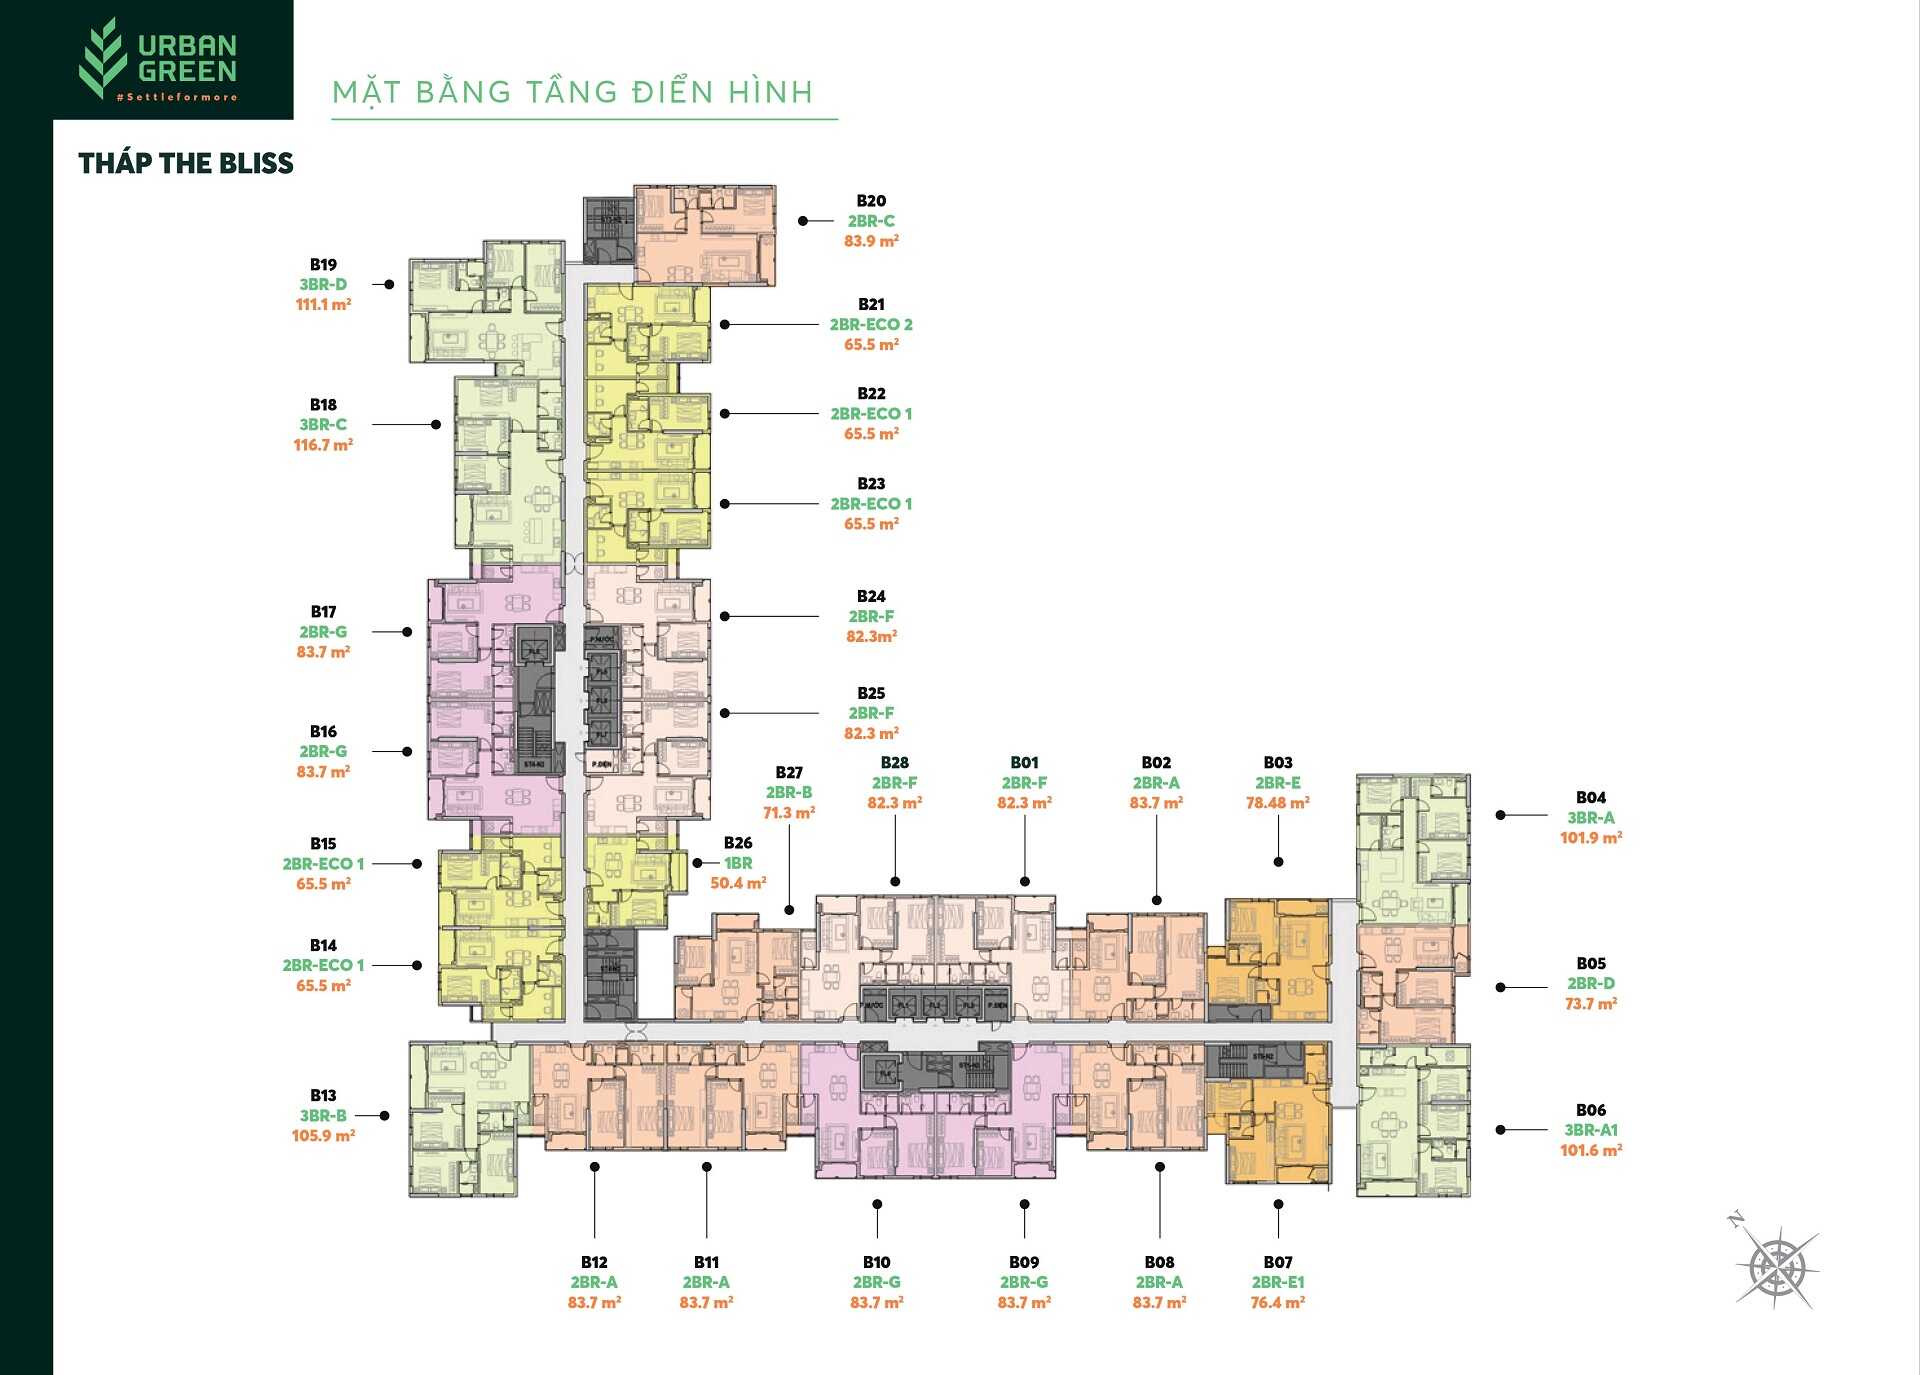 Typical floor plan of The Bliss Urban Green tower